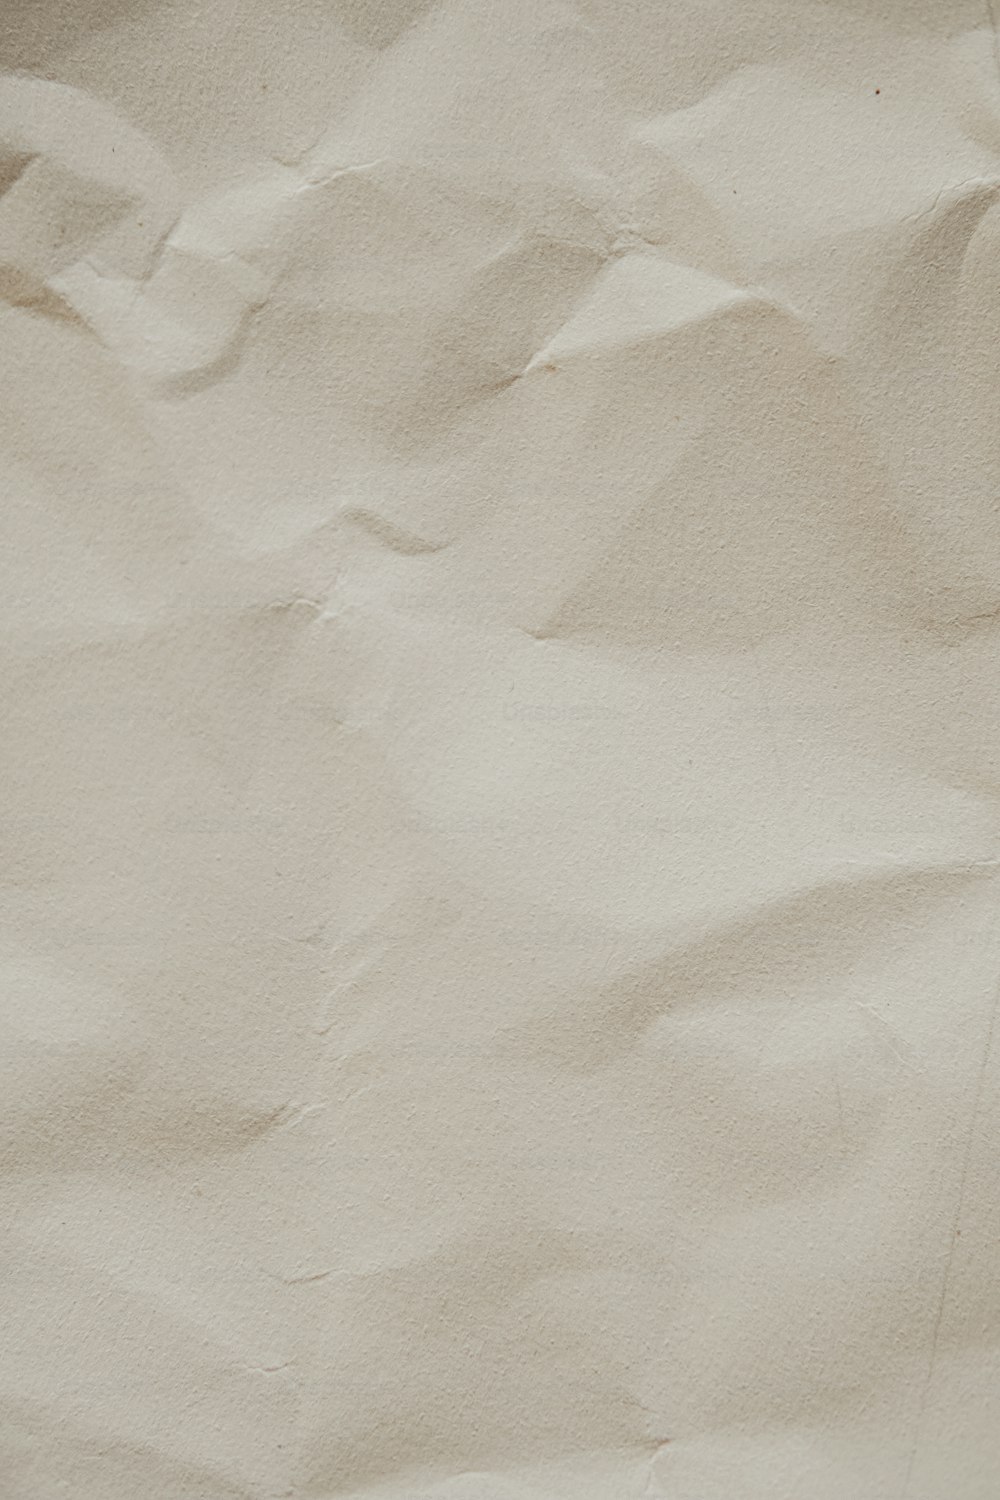 Close Up White Crumpled Tissue Paper Background Texture Stock Photo,  Picture and Royalty Free Image. Image 45368189.